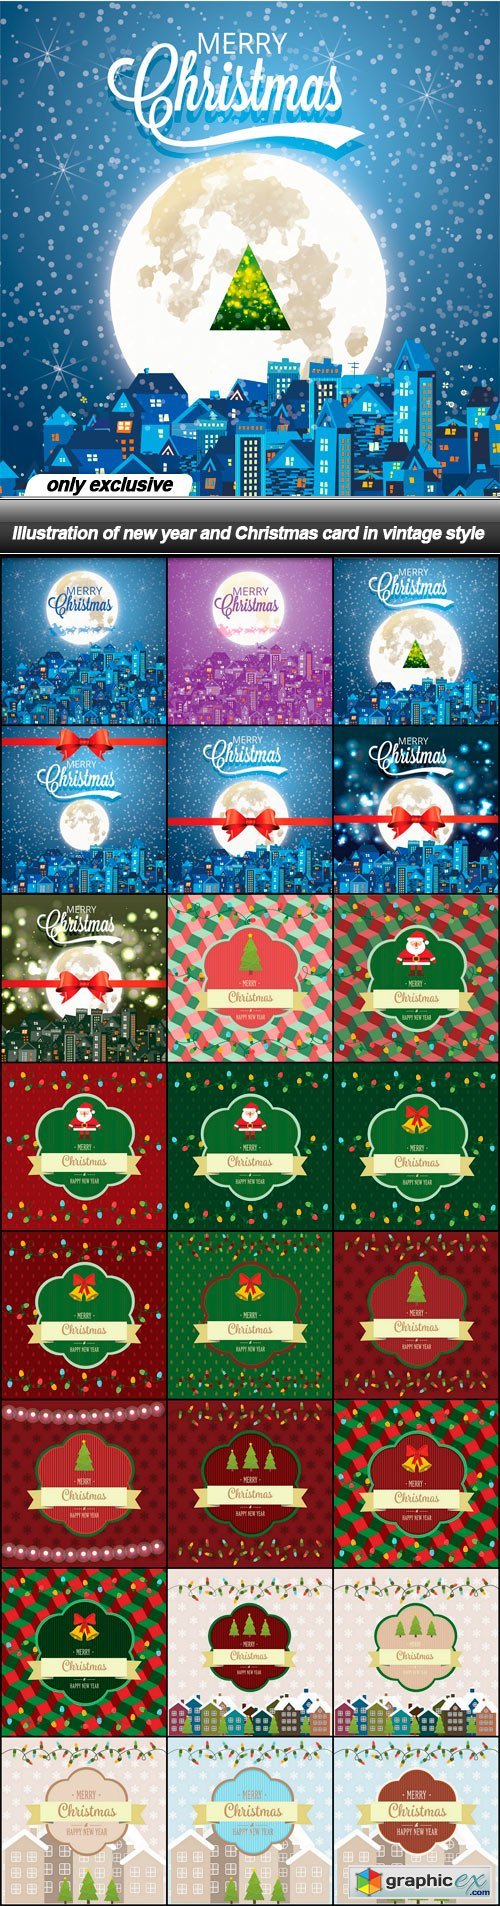 Illustration of new year and Christmas card in vintage style - 24 EPS